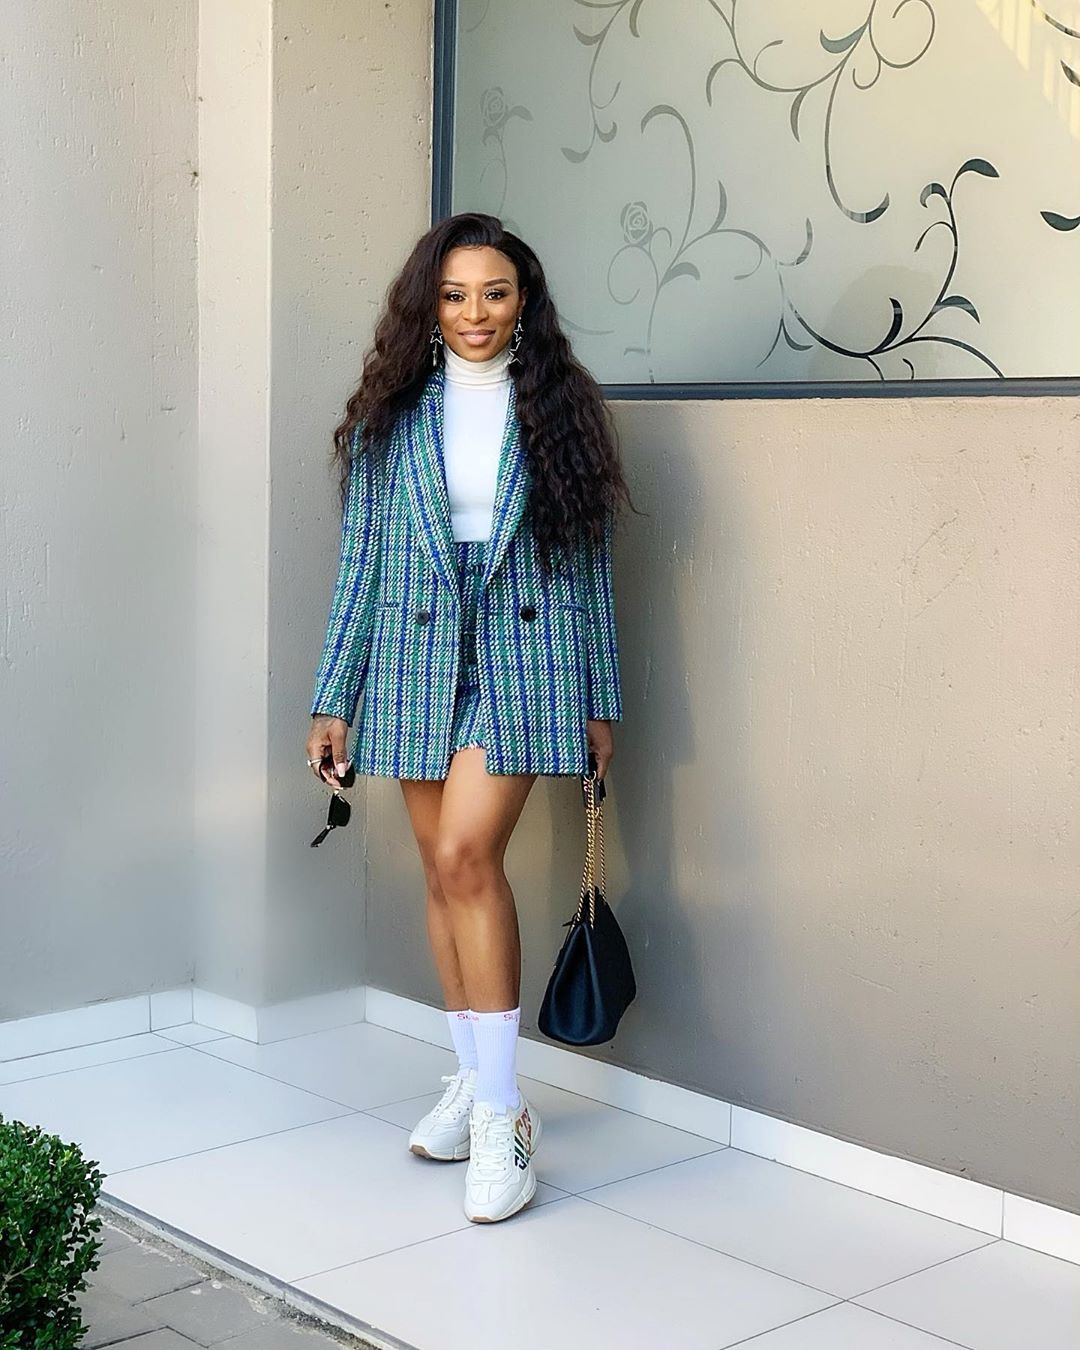 dj-zinhle-southafrican-celeb-style-south-african-celebrity